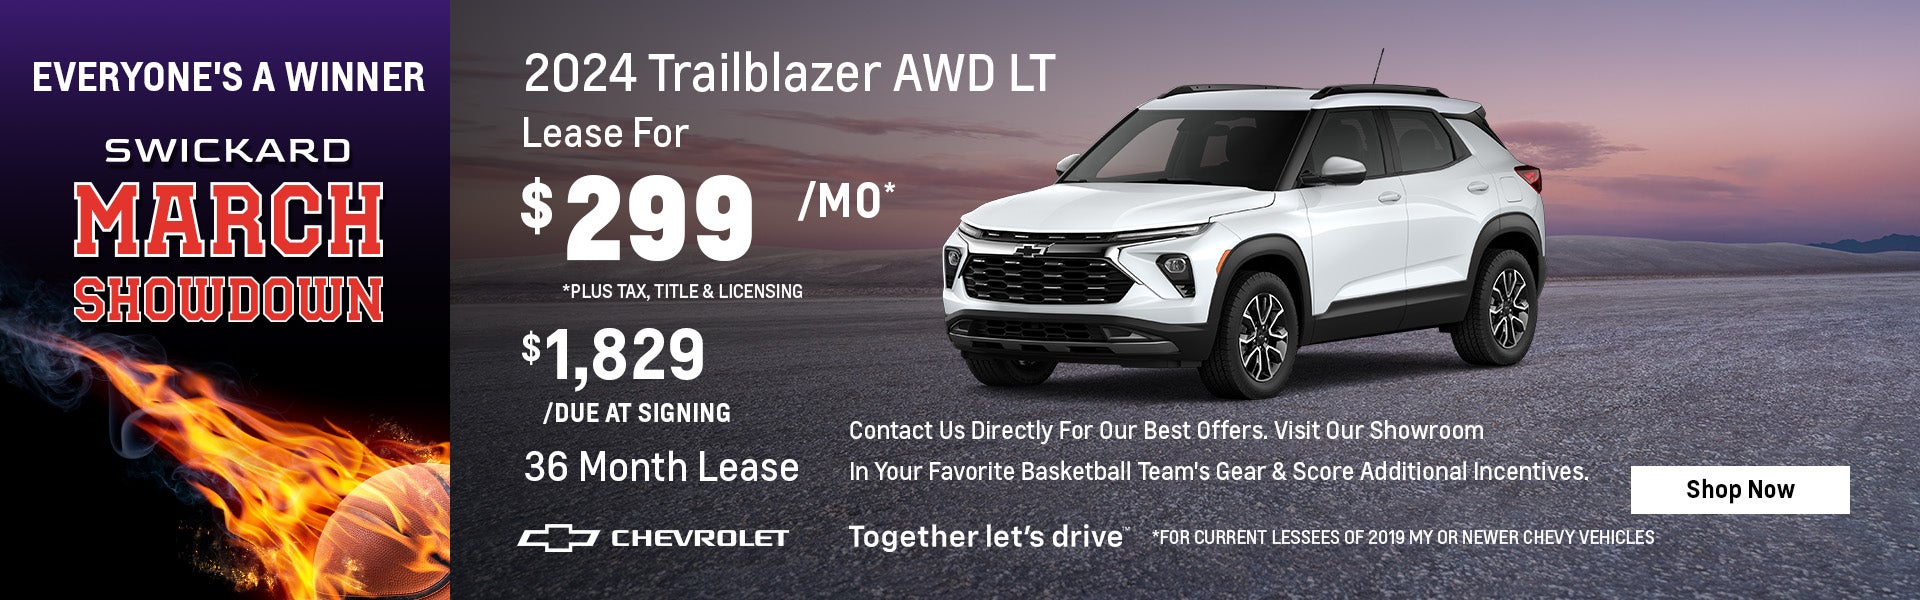 Lease for $299 per month for 36 mos. 2024 Trailblazer AWD LT